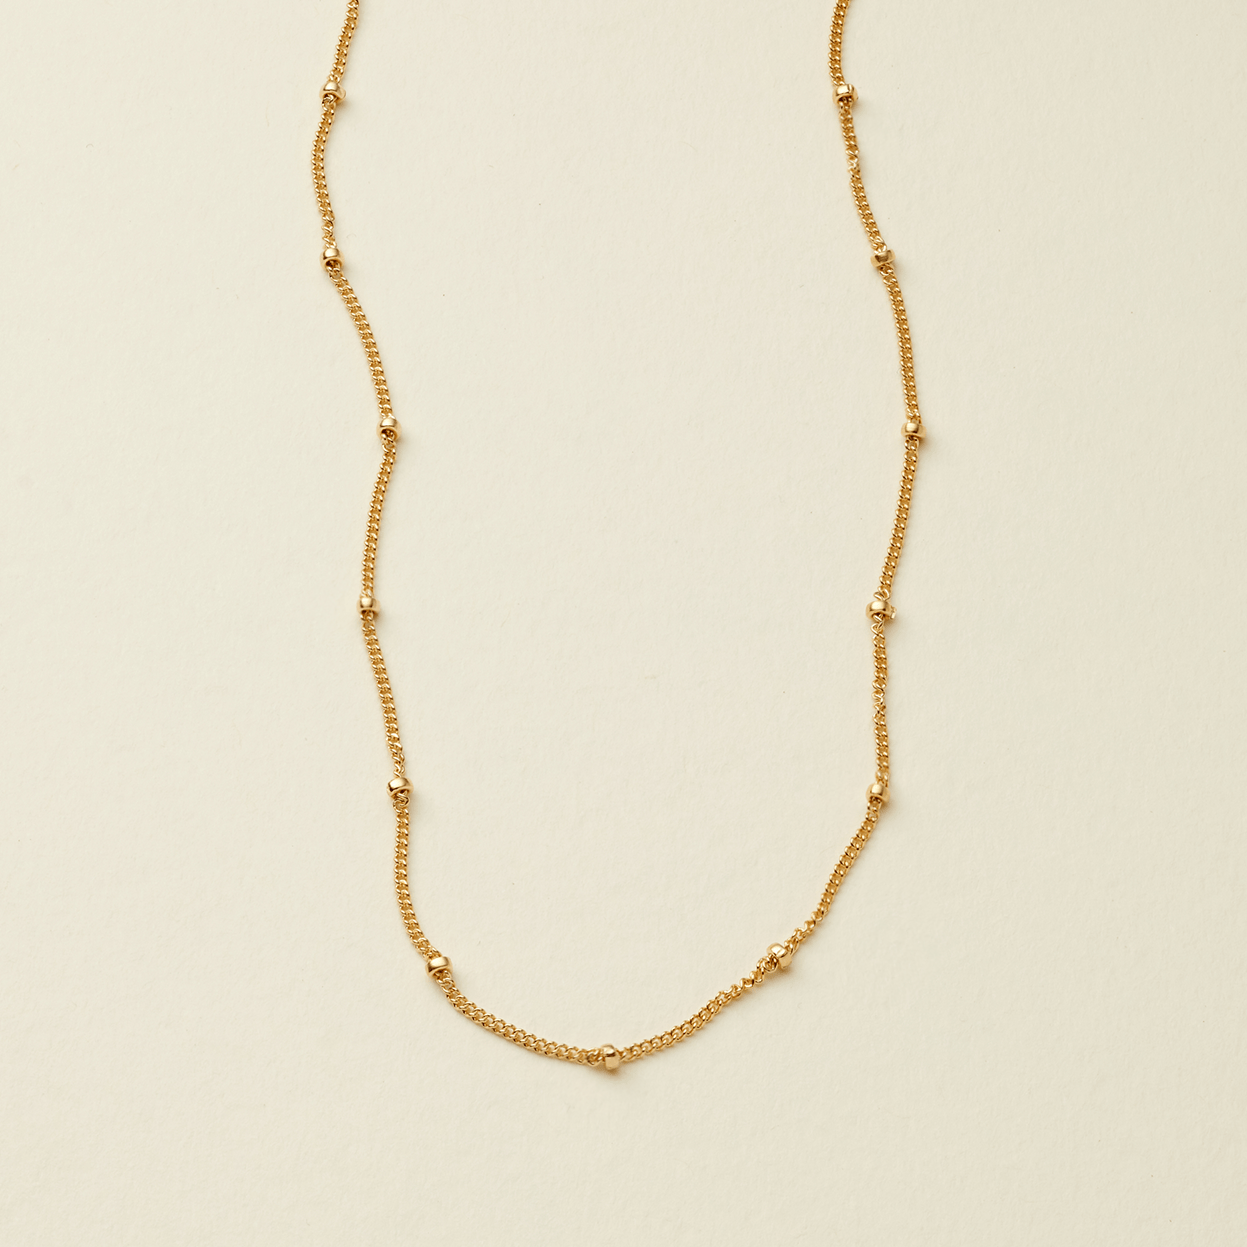 Satellite Chain Gold Filled / 16" Necklace